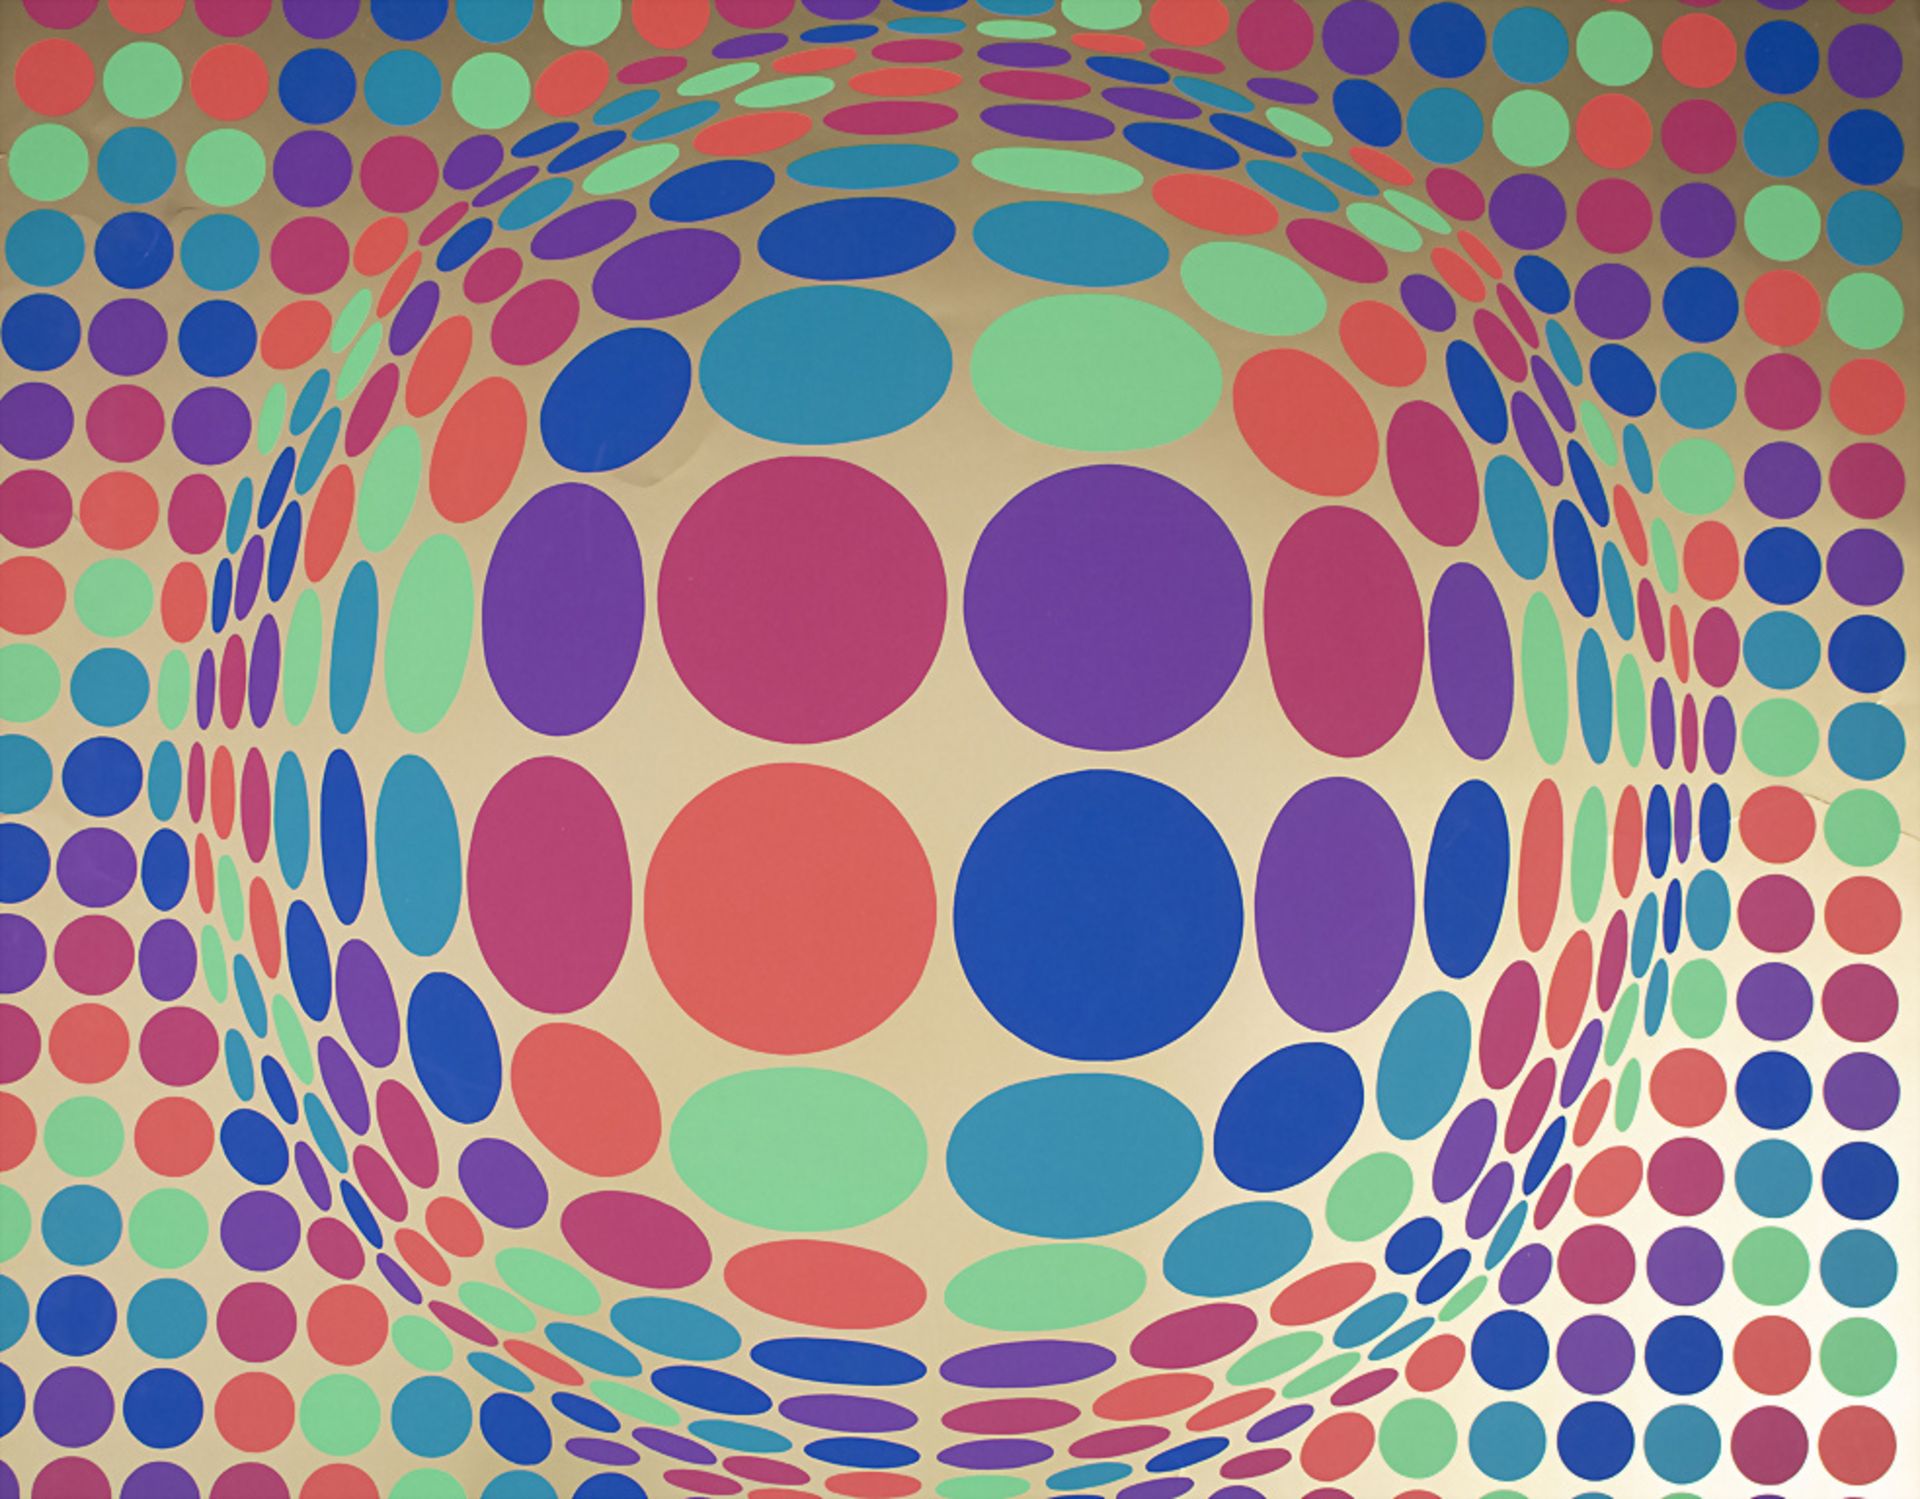 Victor VASARELY (1906-1997), 'Kompsition Kugel' / 'Composition ball', 20. Jh. - Image 2 of 4